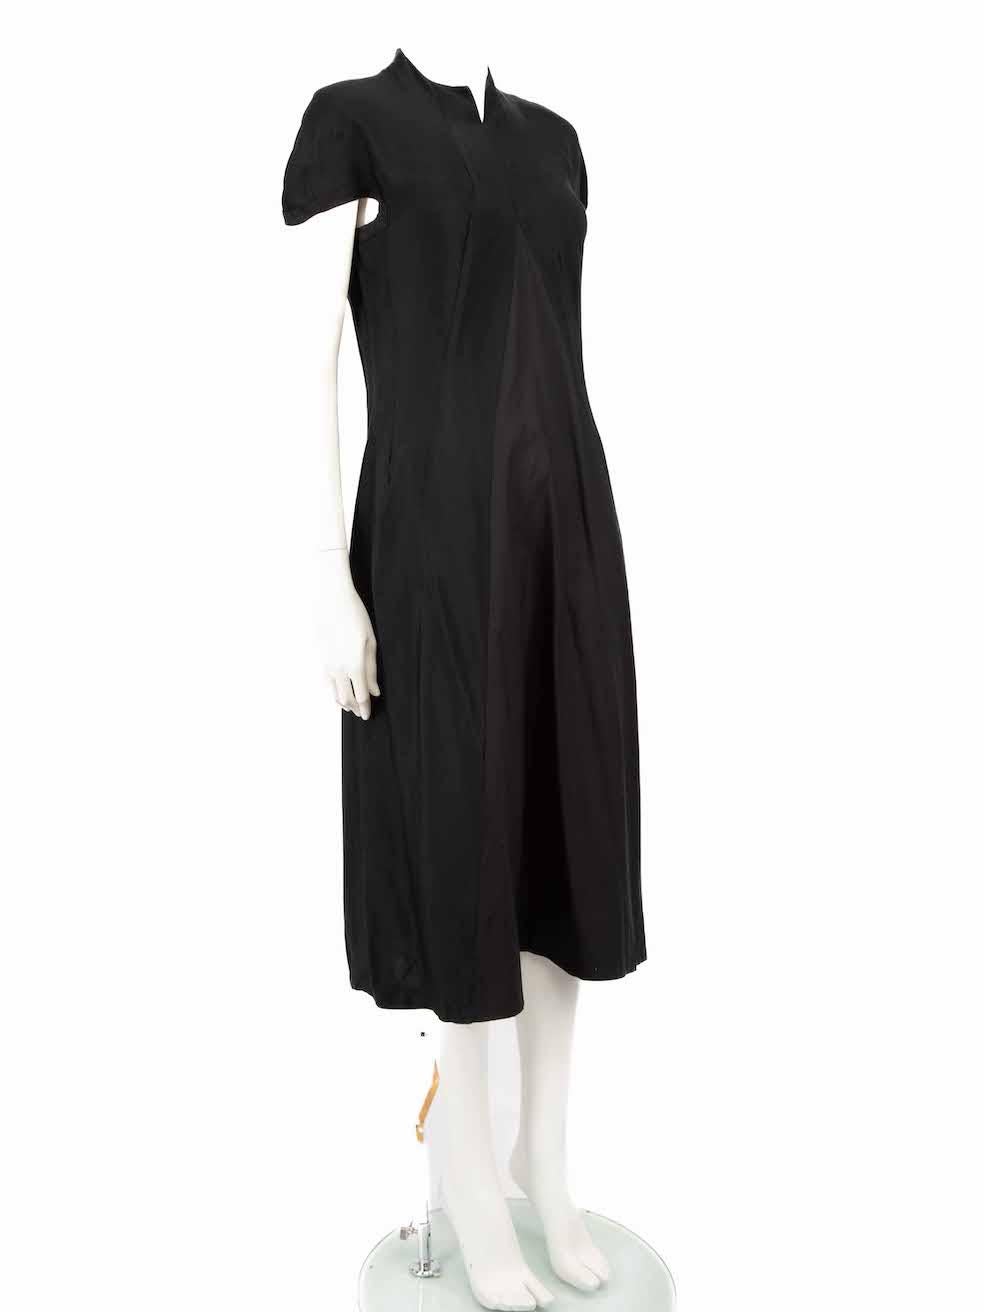 CONDITION is Very good. Minimal wear to dress is evident. Minimal pull thread to weave to front neck, right shoulder, rear neck and rear hip on this used Yohji Yamamoto designer resale item.
 
 
 
 Details
 
 
 Black
 
 Viscose
 
 Dress
 
 Short cap